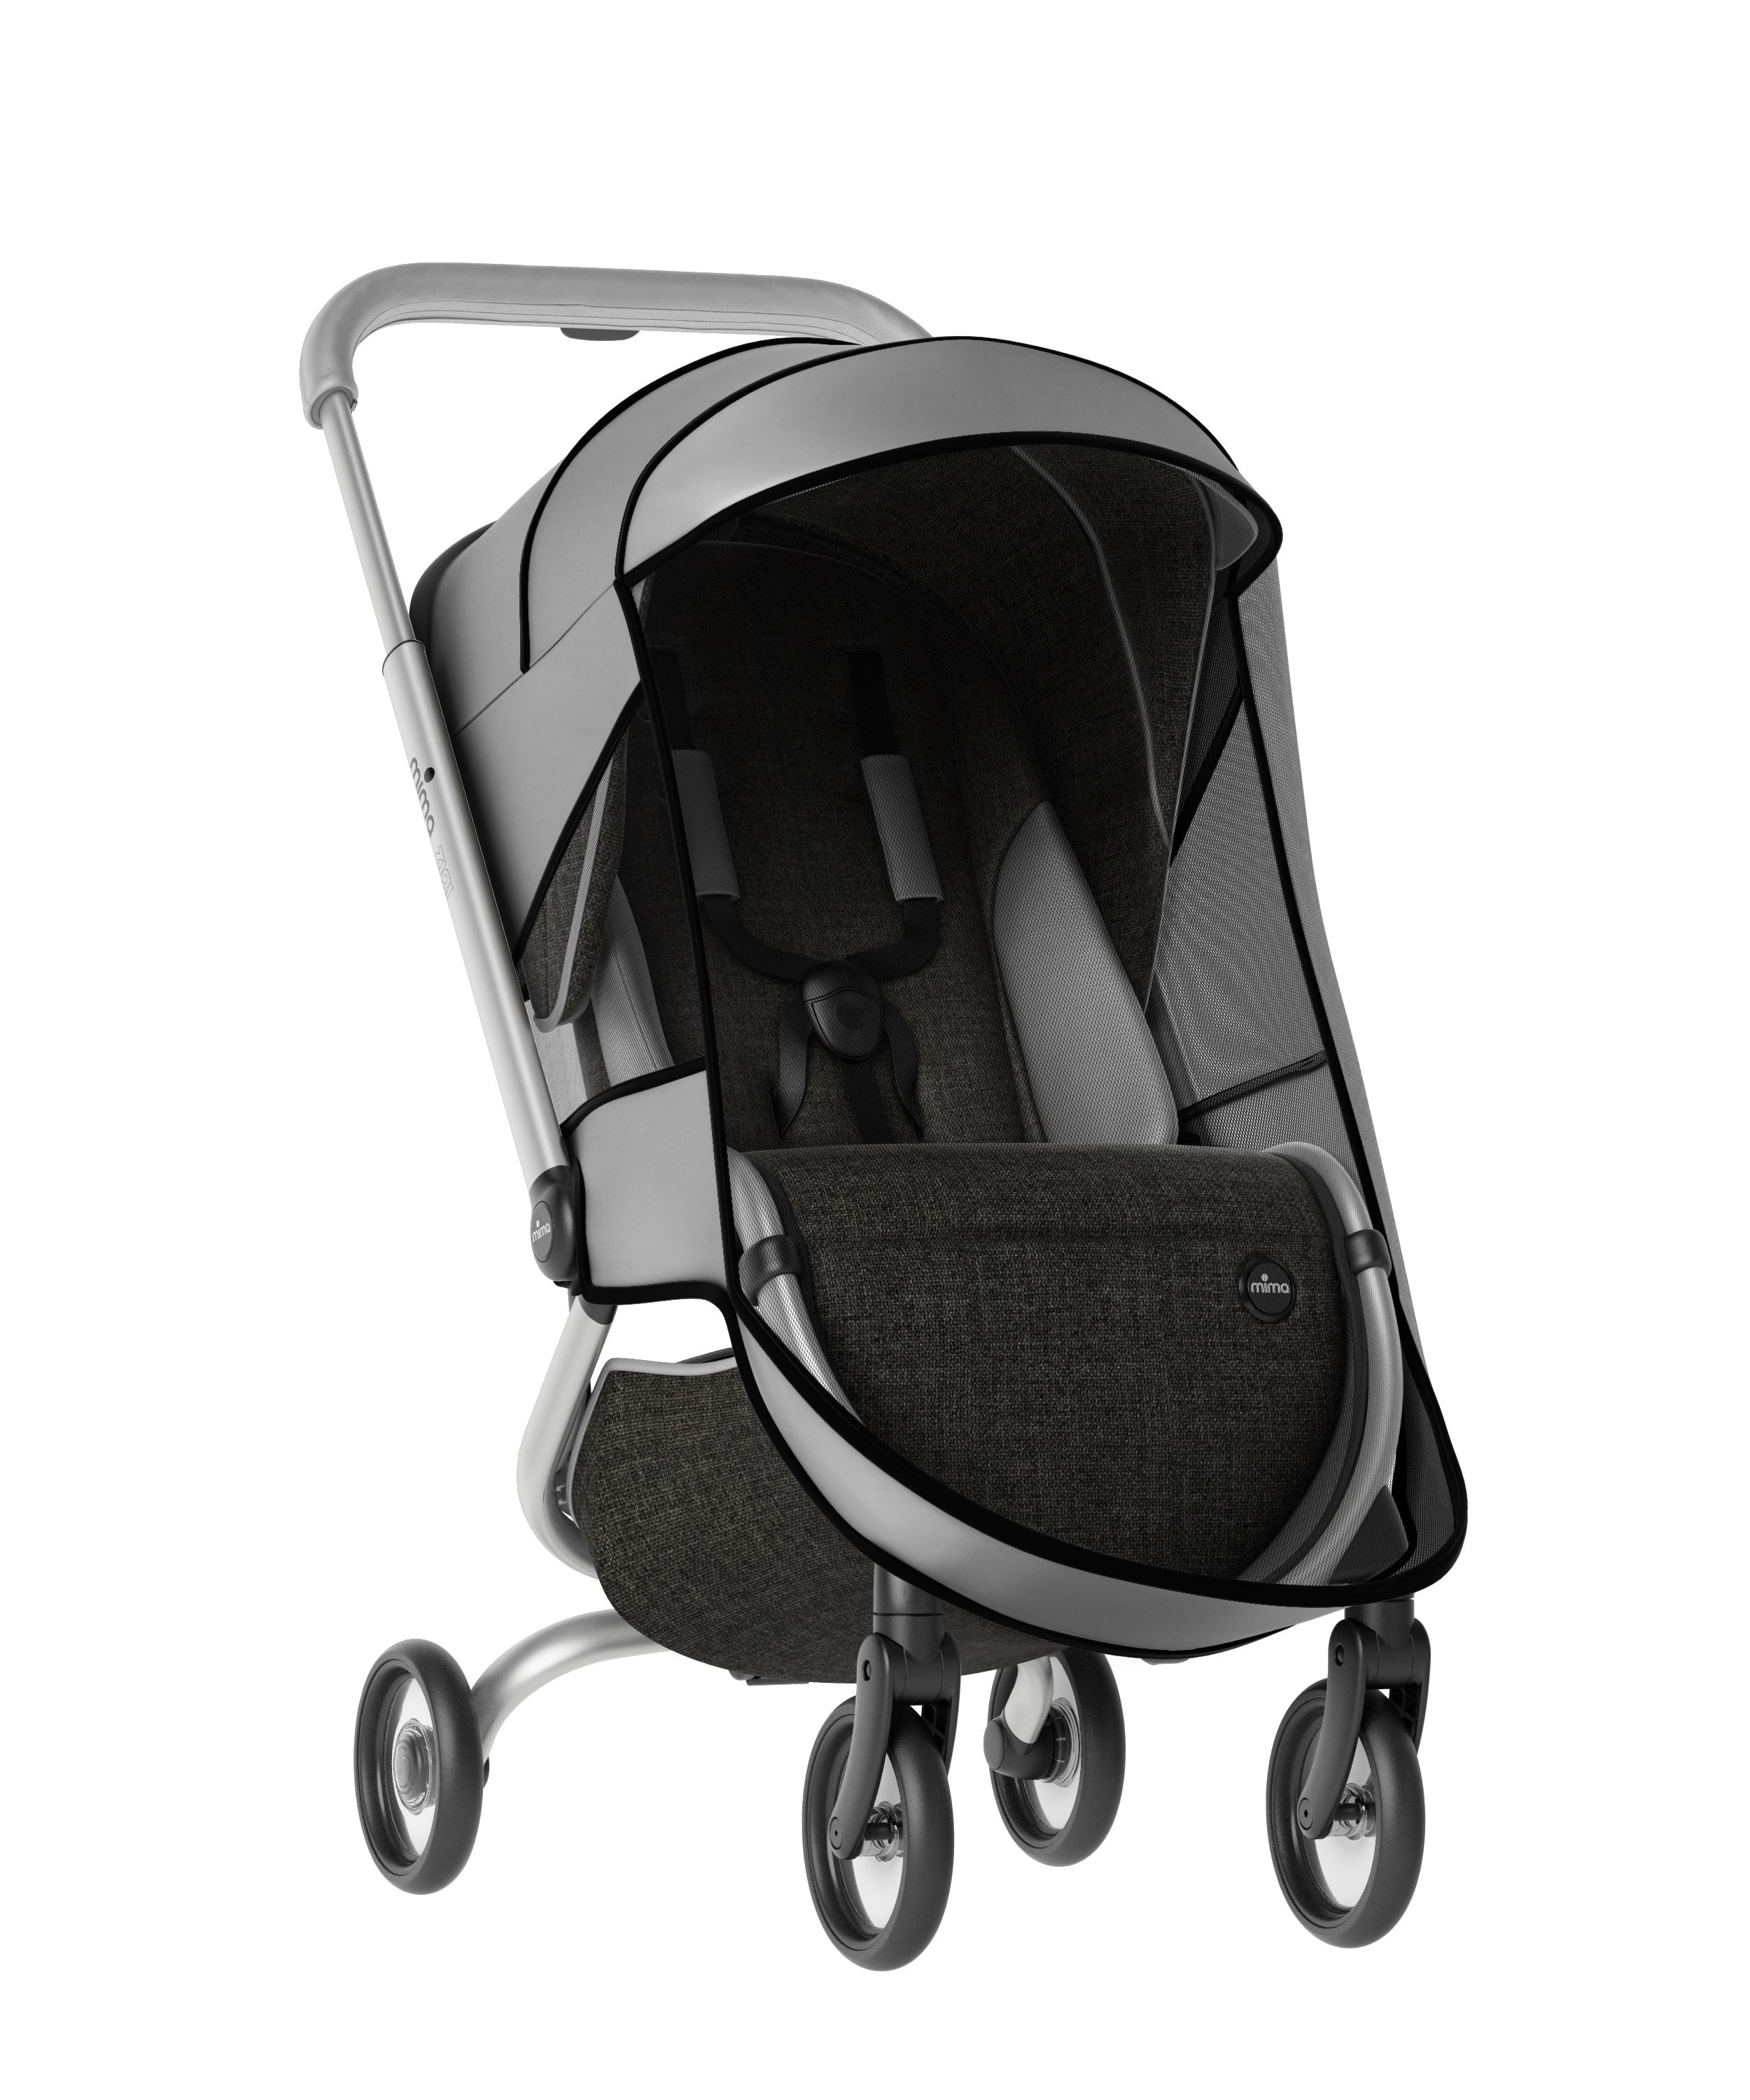 mosquito cover stroller